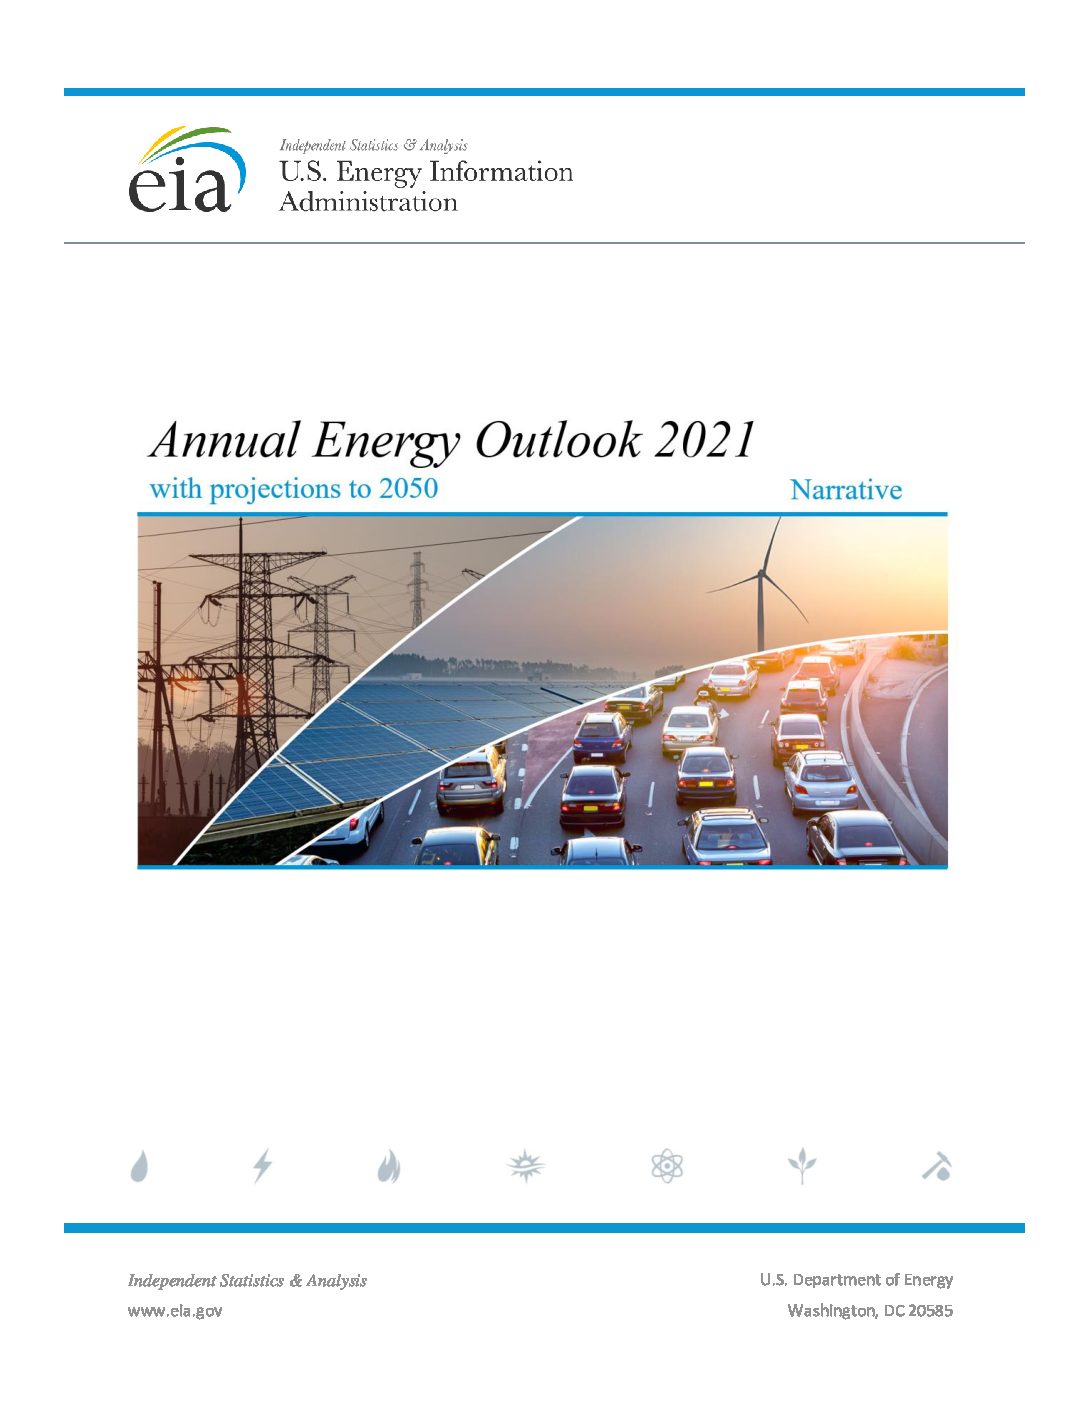 U.S. Energy Information Administration – Annual Energy Outlook 2021